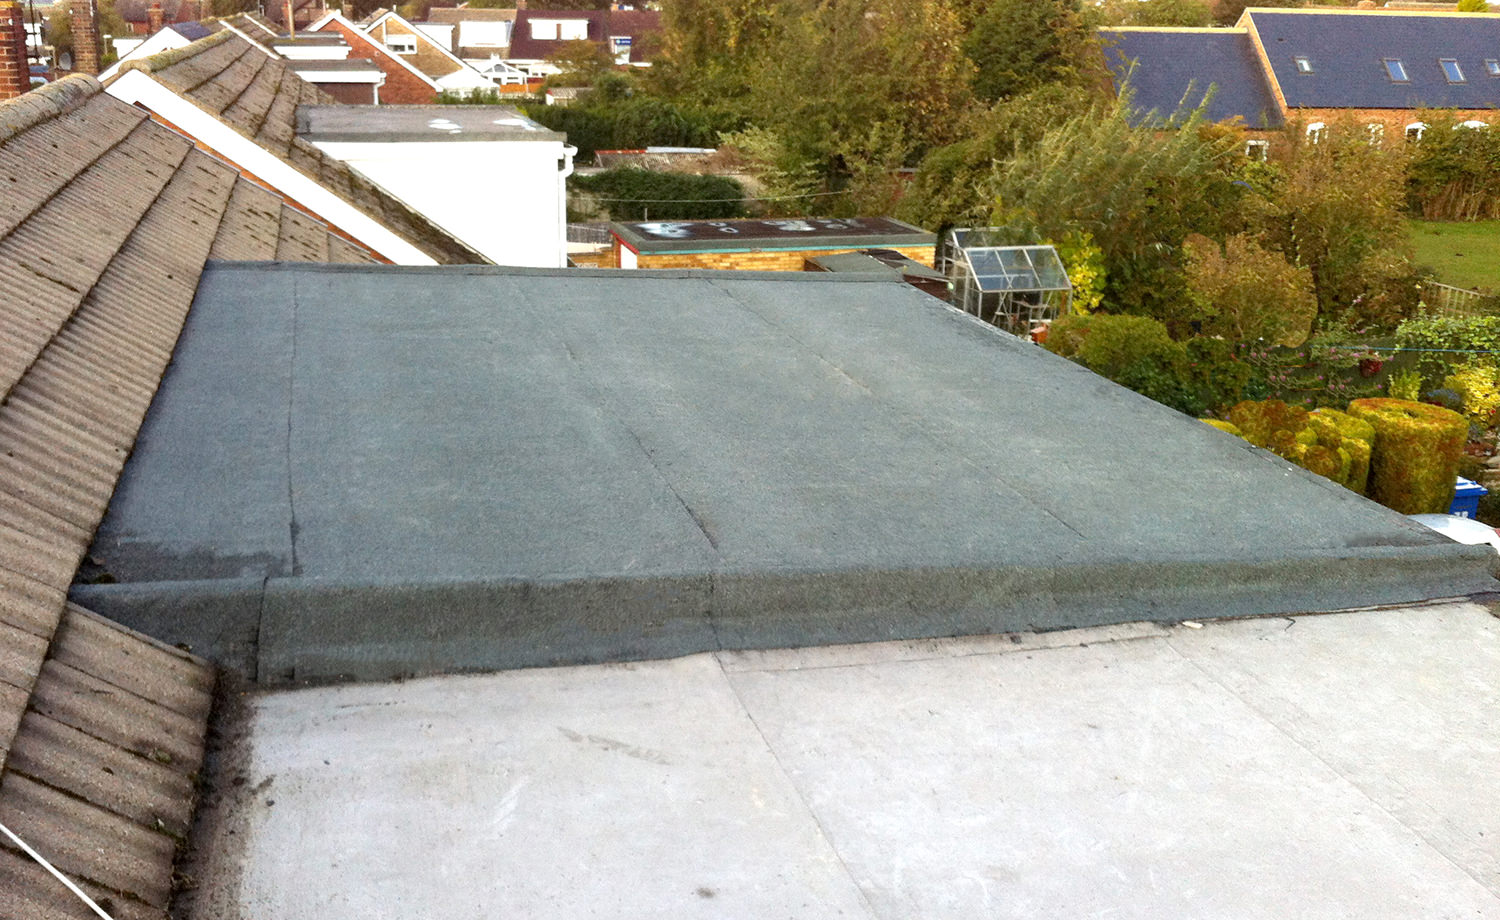 Flat Roofs West Design and Build © All Rights Reserved02.jpg